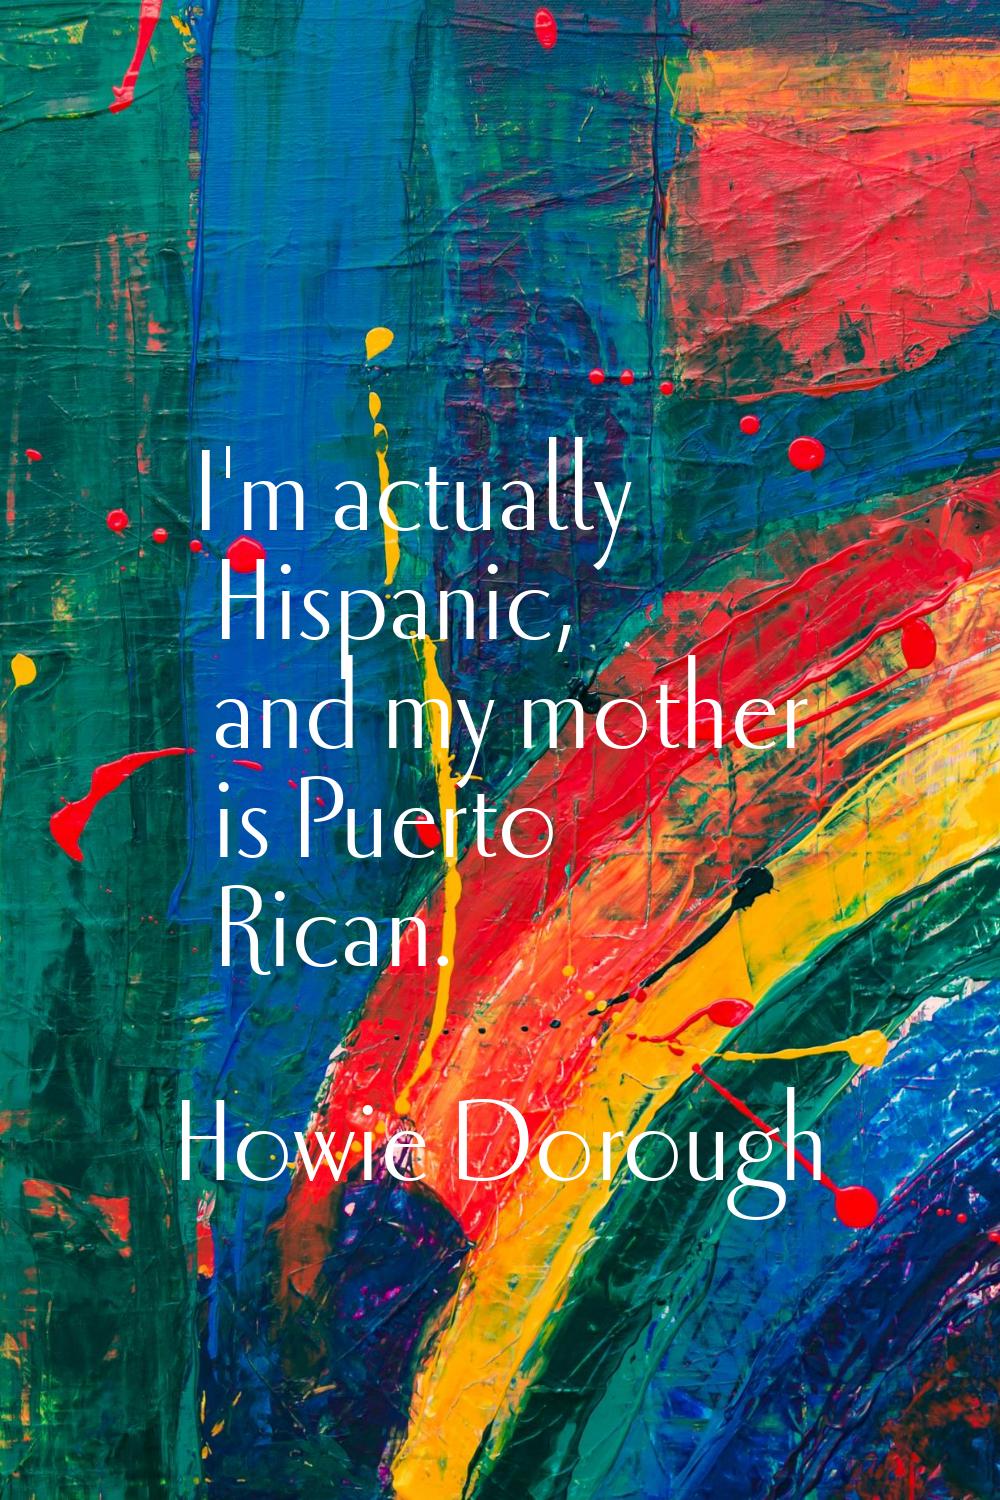 I'm actually Hispanic, and my mother is Puerto Rican.